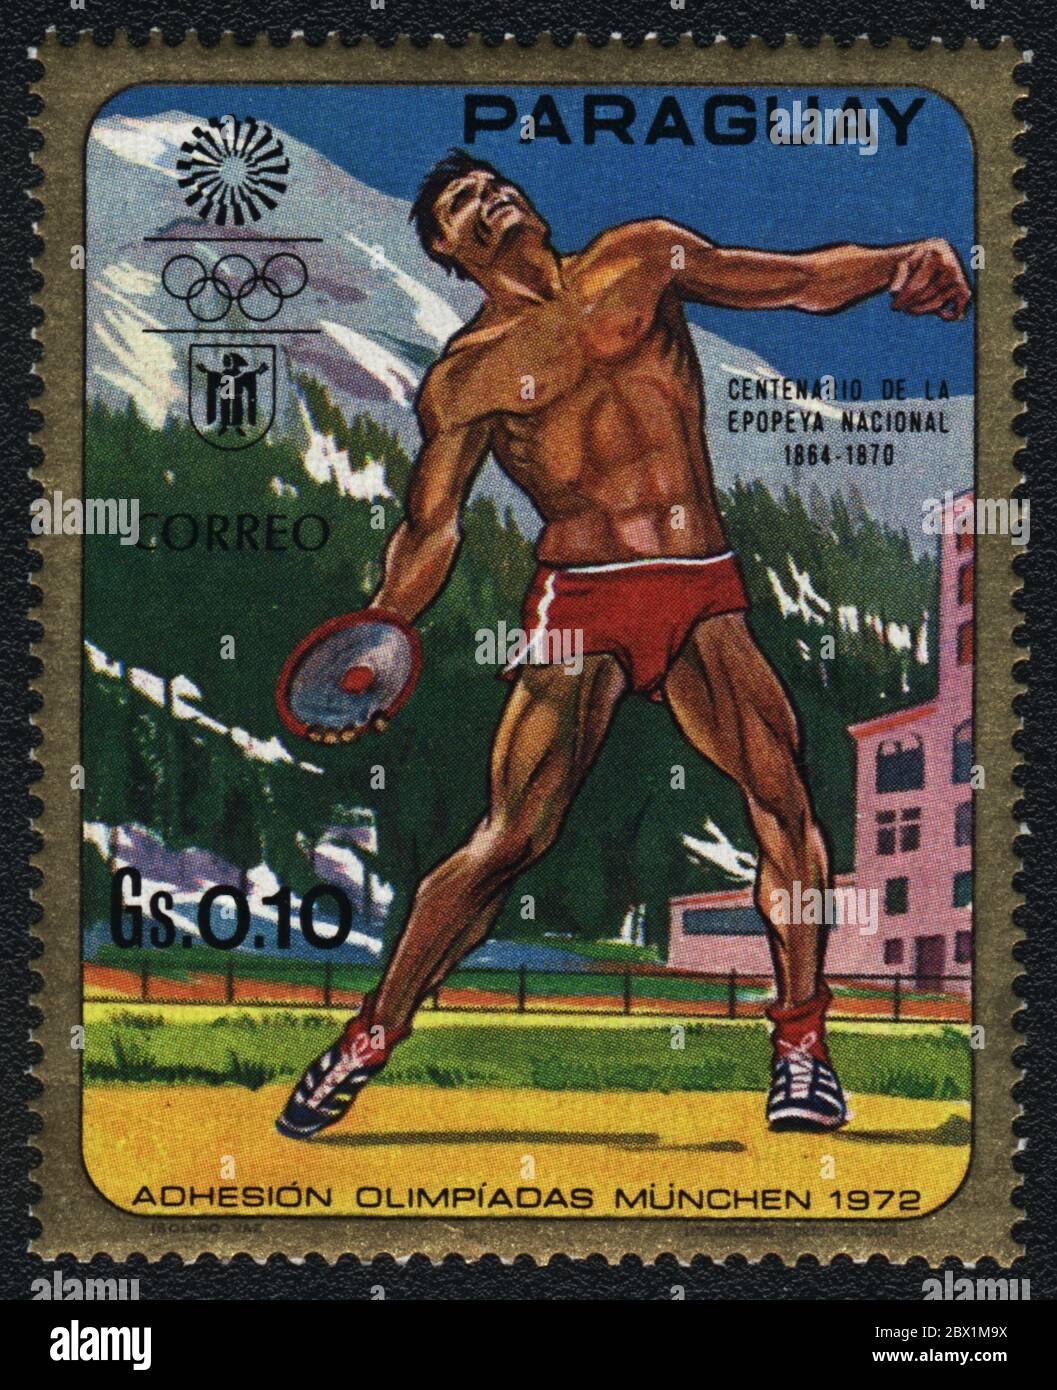 Discus throw. Running hurdles. Summer Olympics Games in Munich 1972. Series: Centenary of the National Epic 1864 - 1870. Postal stamp:  Paraguay, 1972 Stock Photo